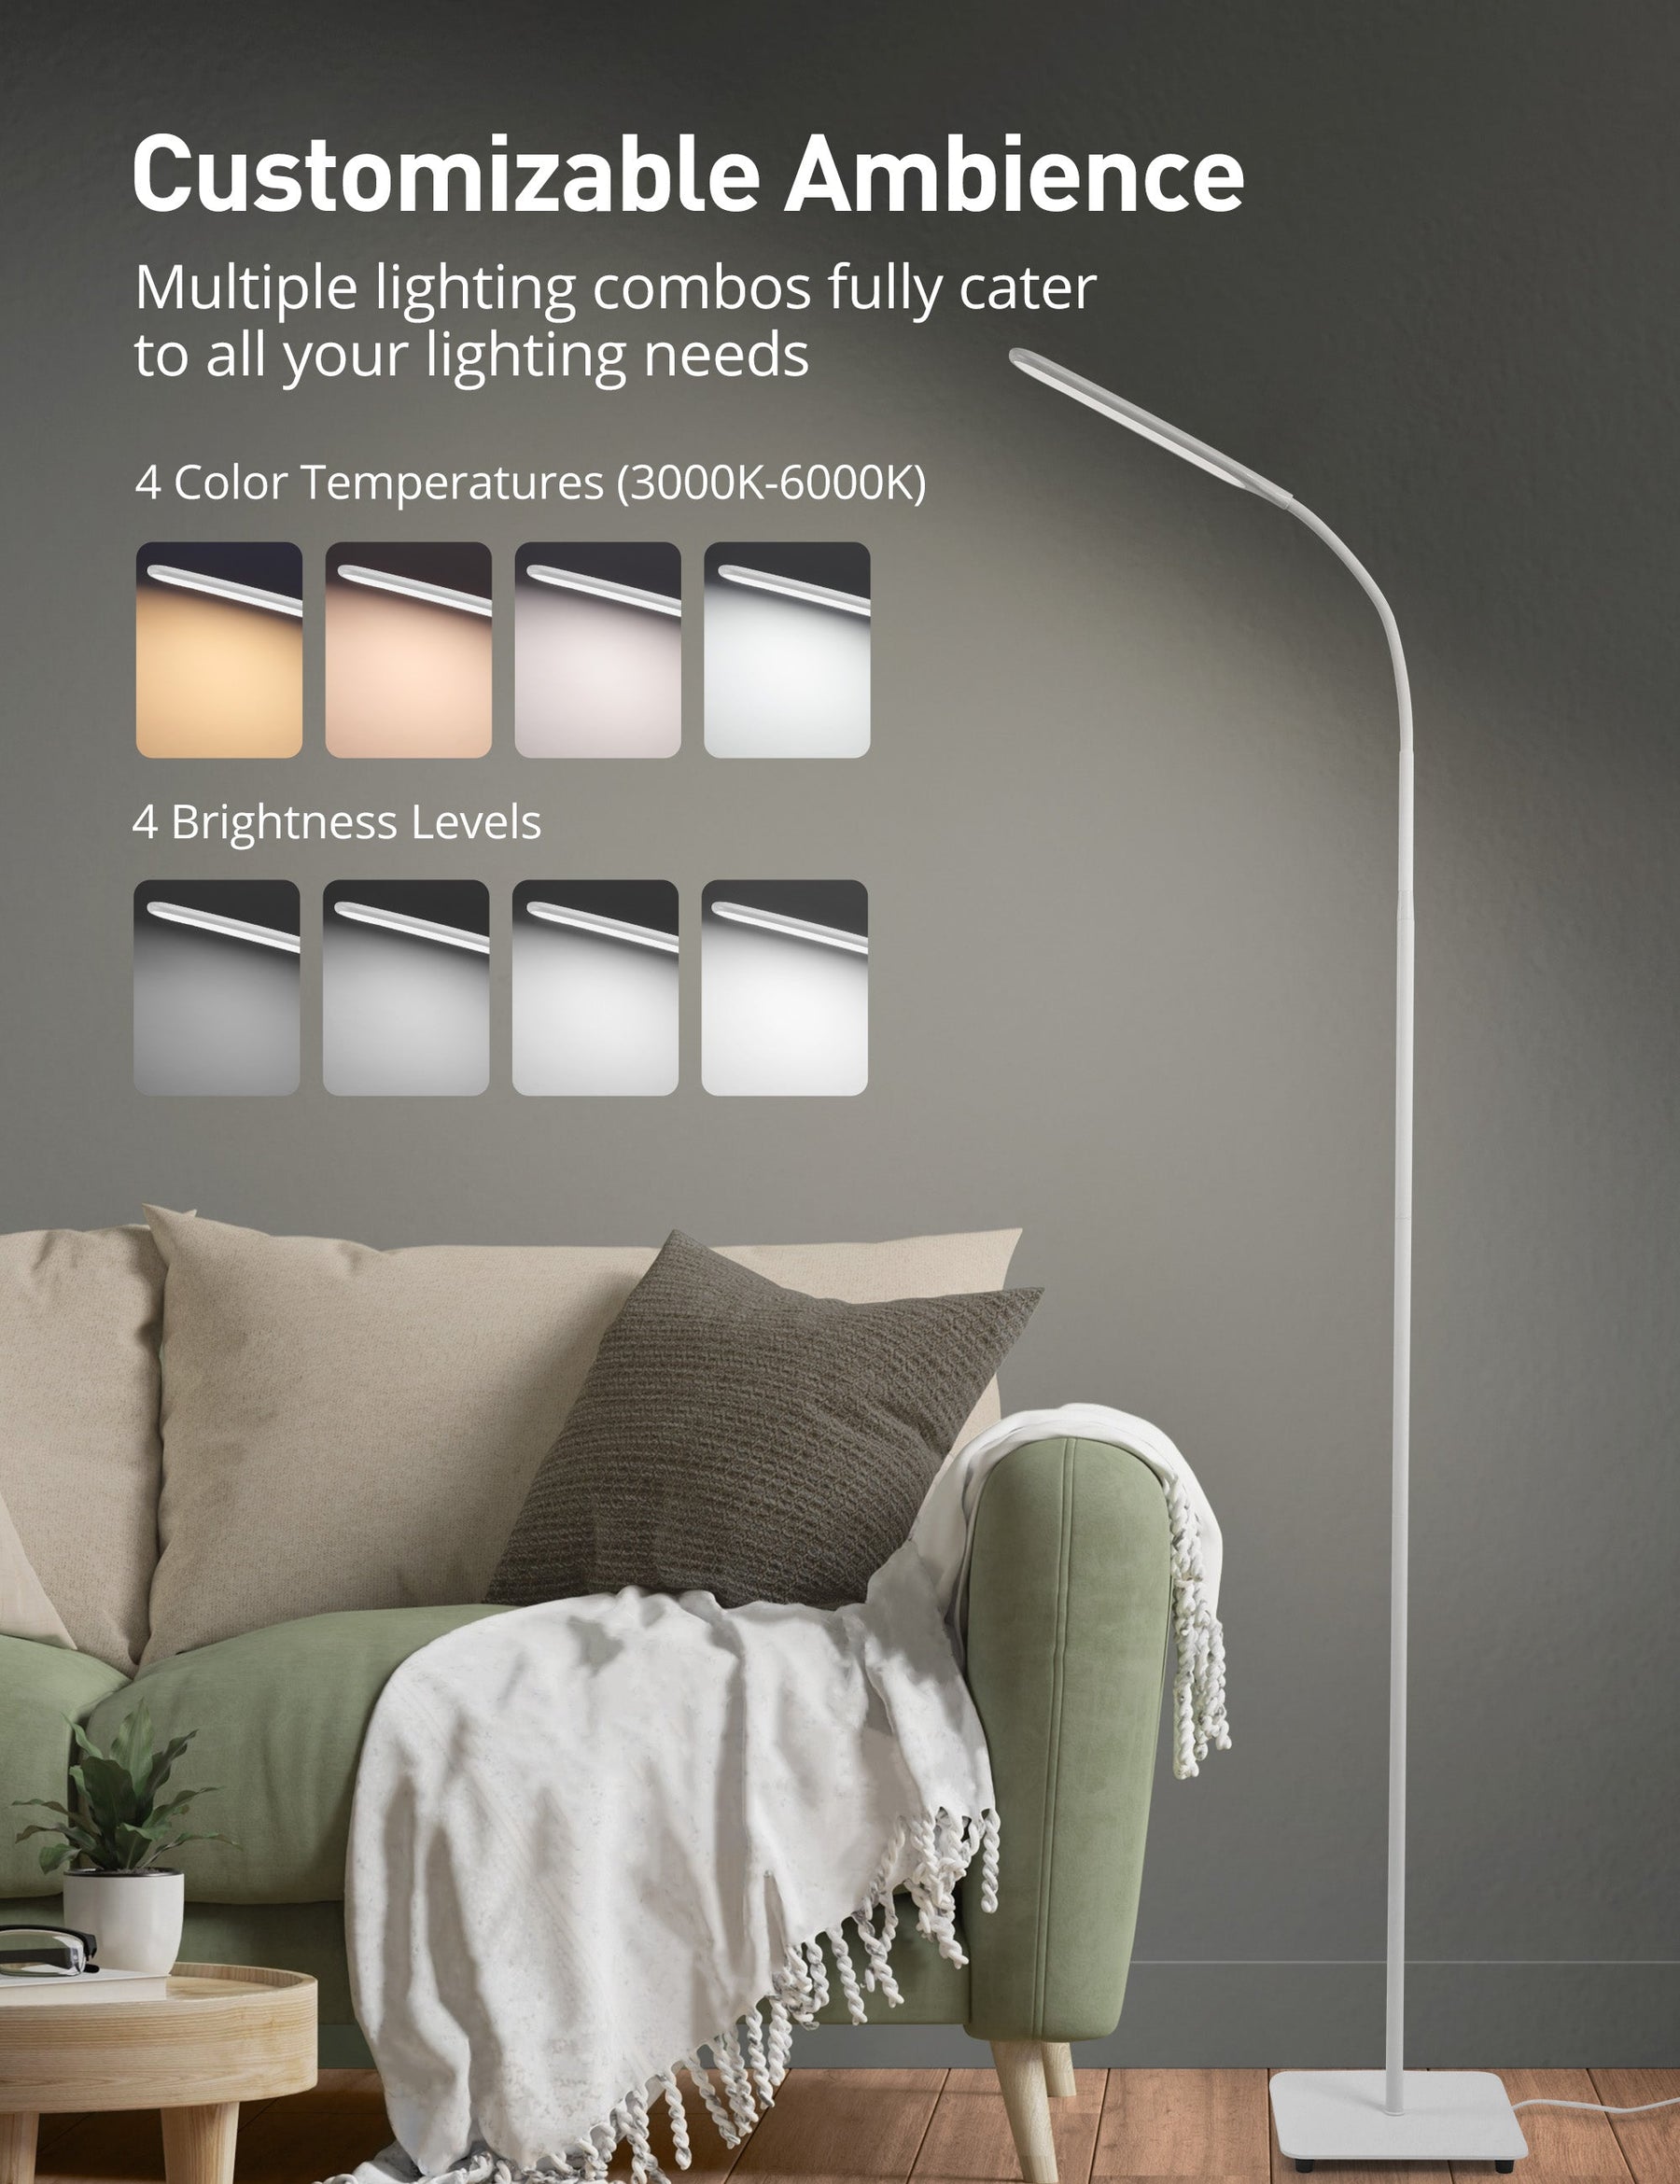 Sympa Floor Lamp DL023, Dimmable Standing Tall Pole Light Touch Control-Table Lamps-ParisRhone